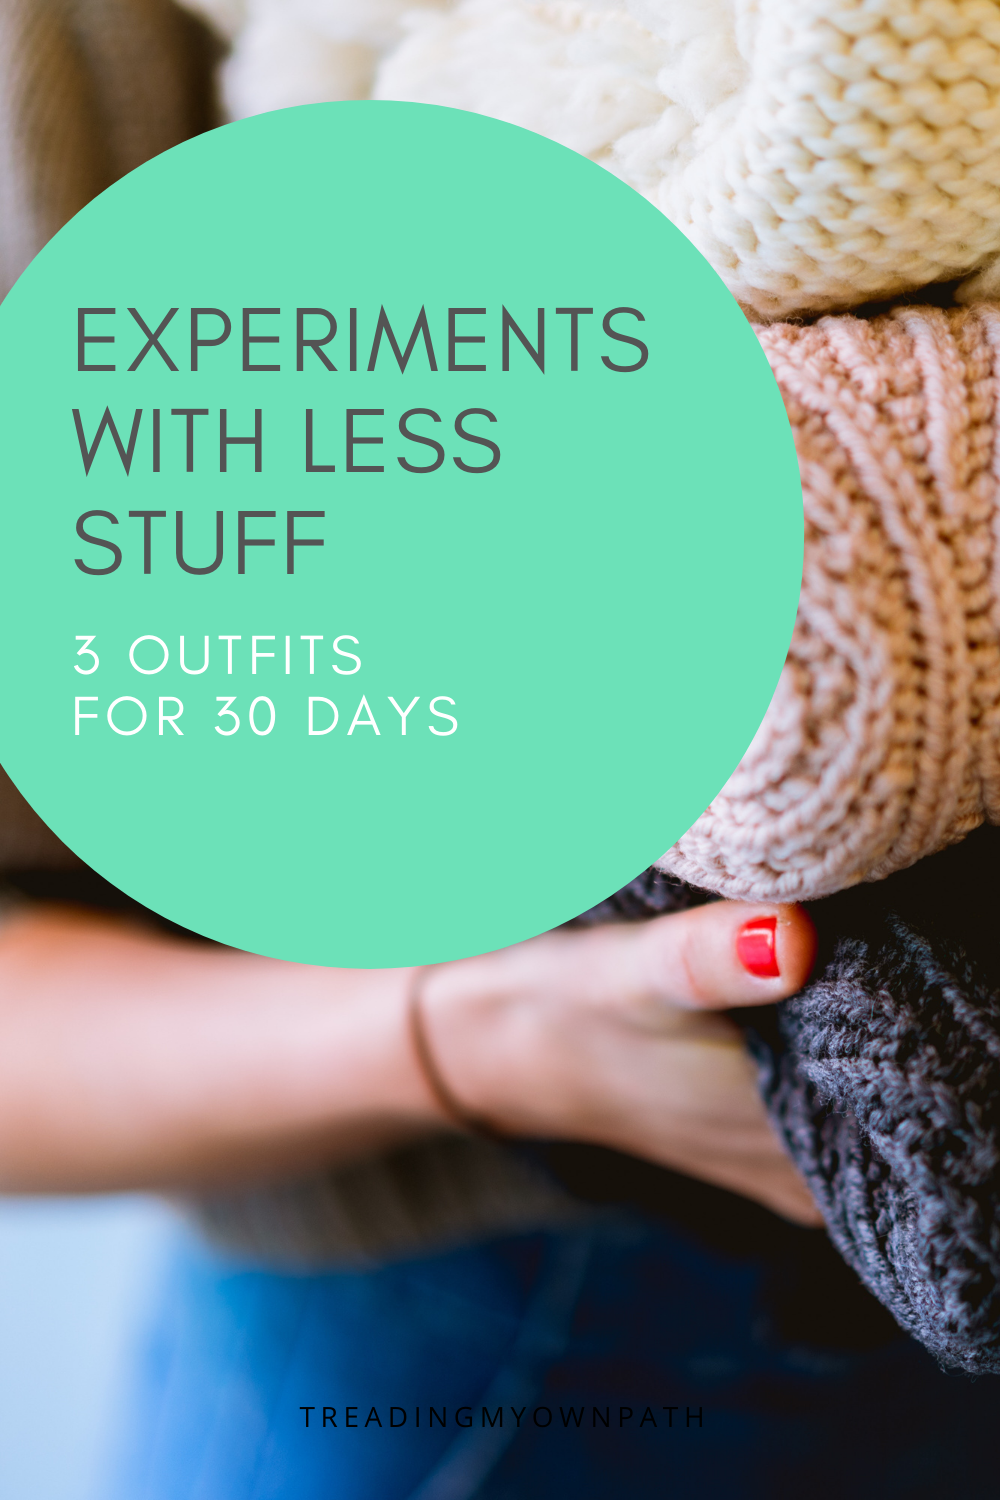 Experiments with Less Stuff: 3 Outfits for 30 Days